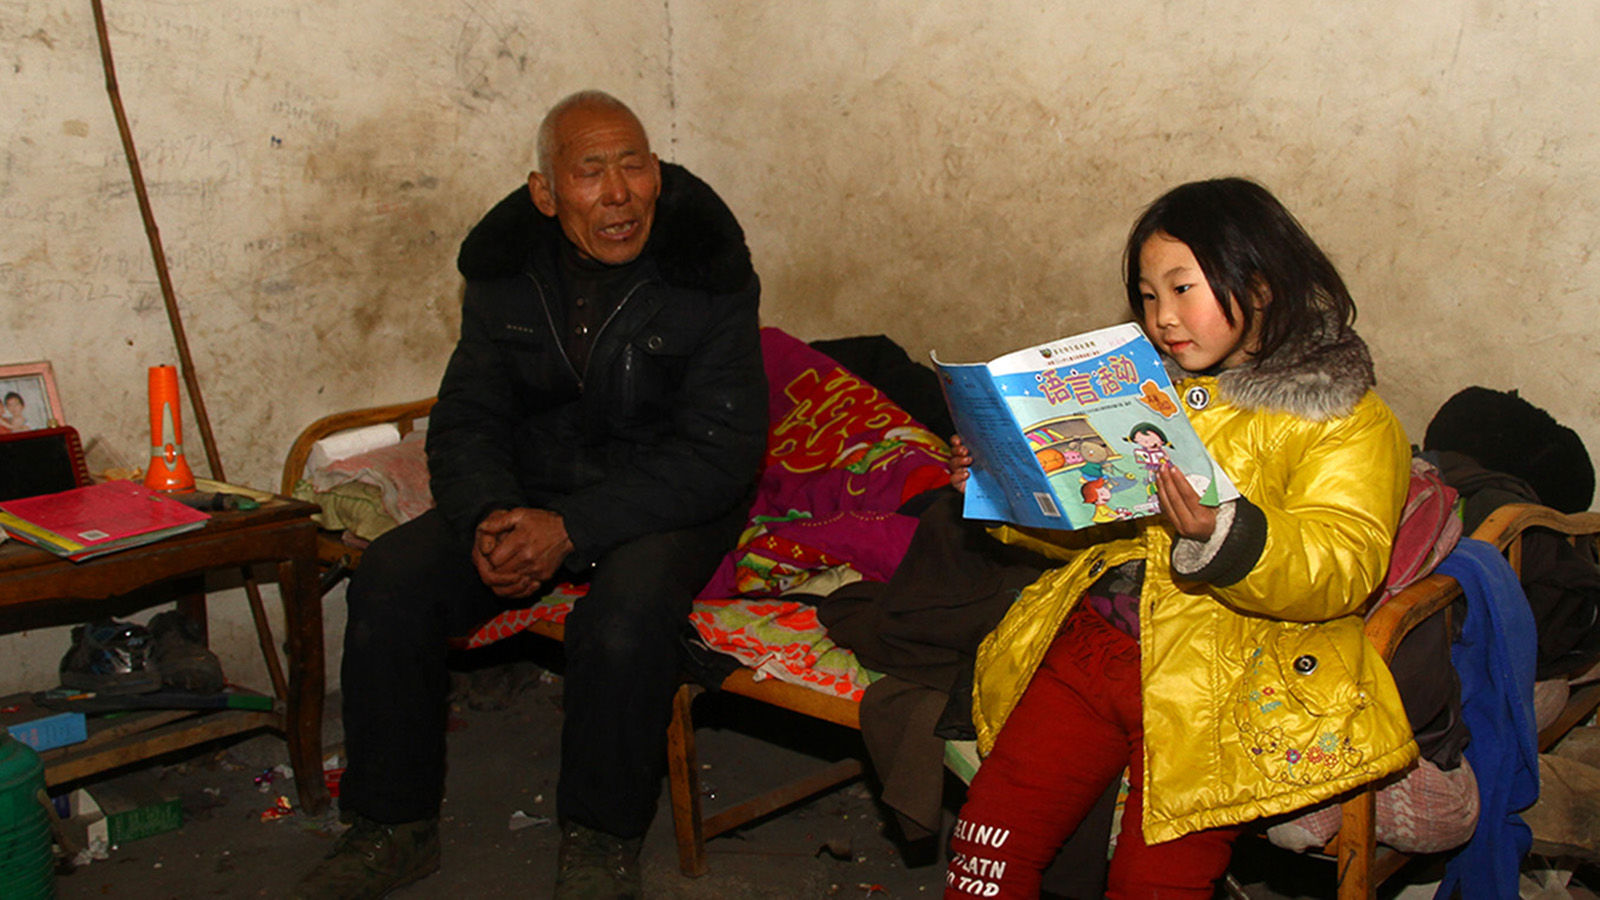 Before dinner, Yutong practiced reading aloud to her grandpa. Illiterate, just like Grandma, Grandpa is always an enthusiastic audience.